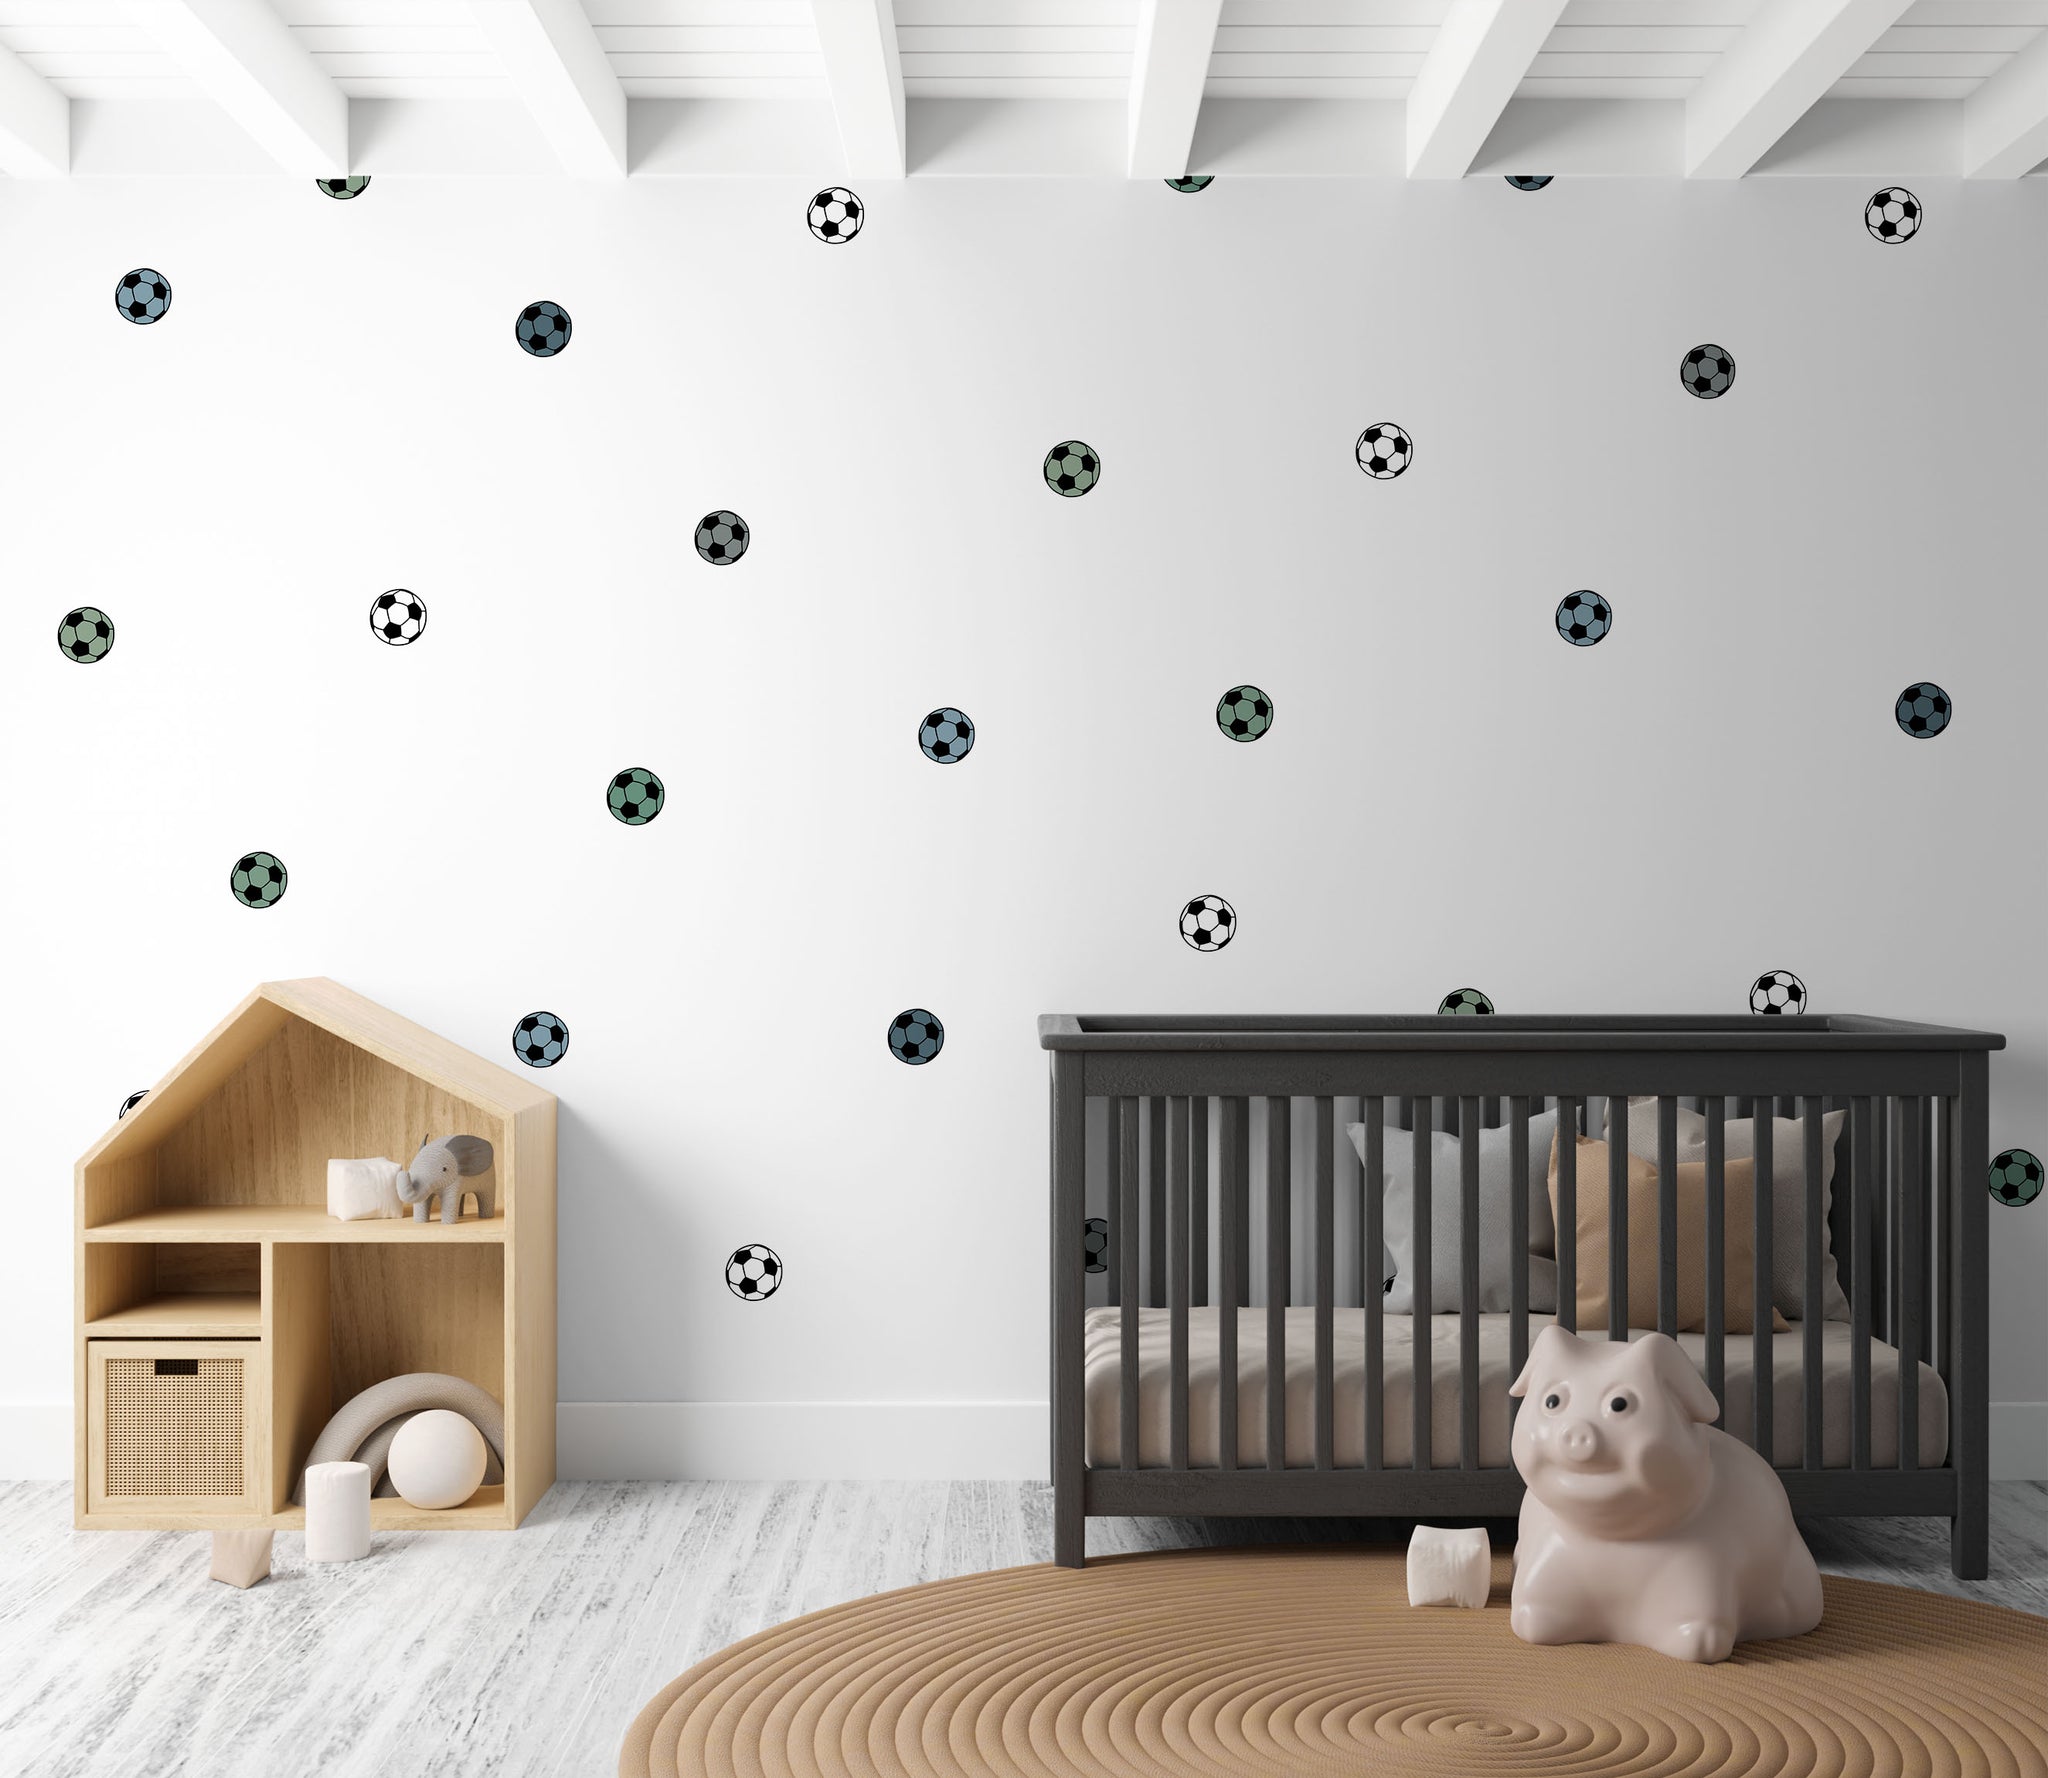 Football Wall Stickers (Coloured) - Fabric, Reusable and Eco-Friendly